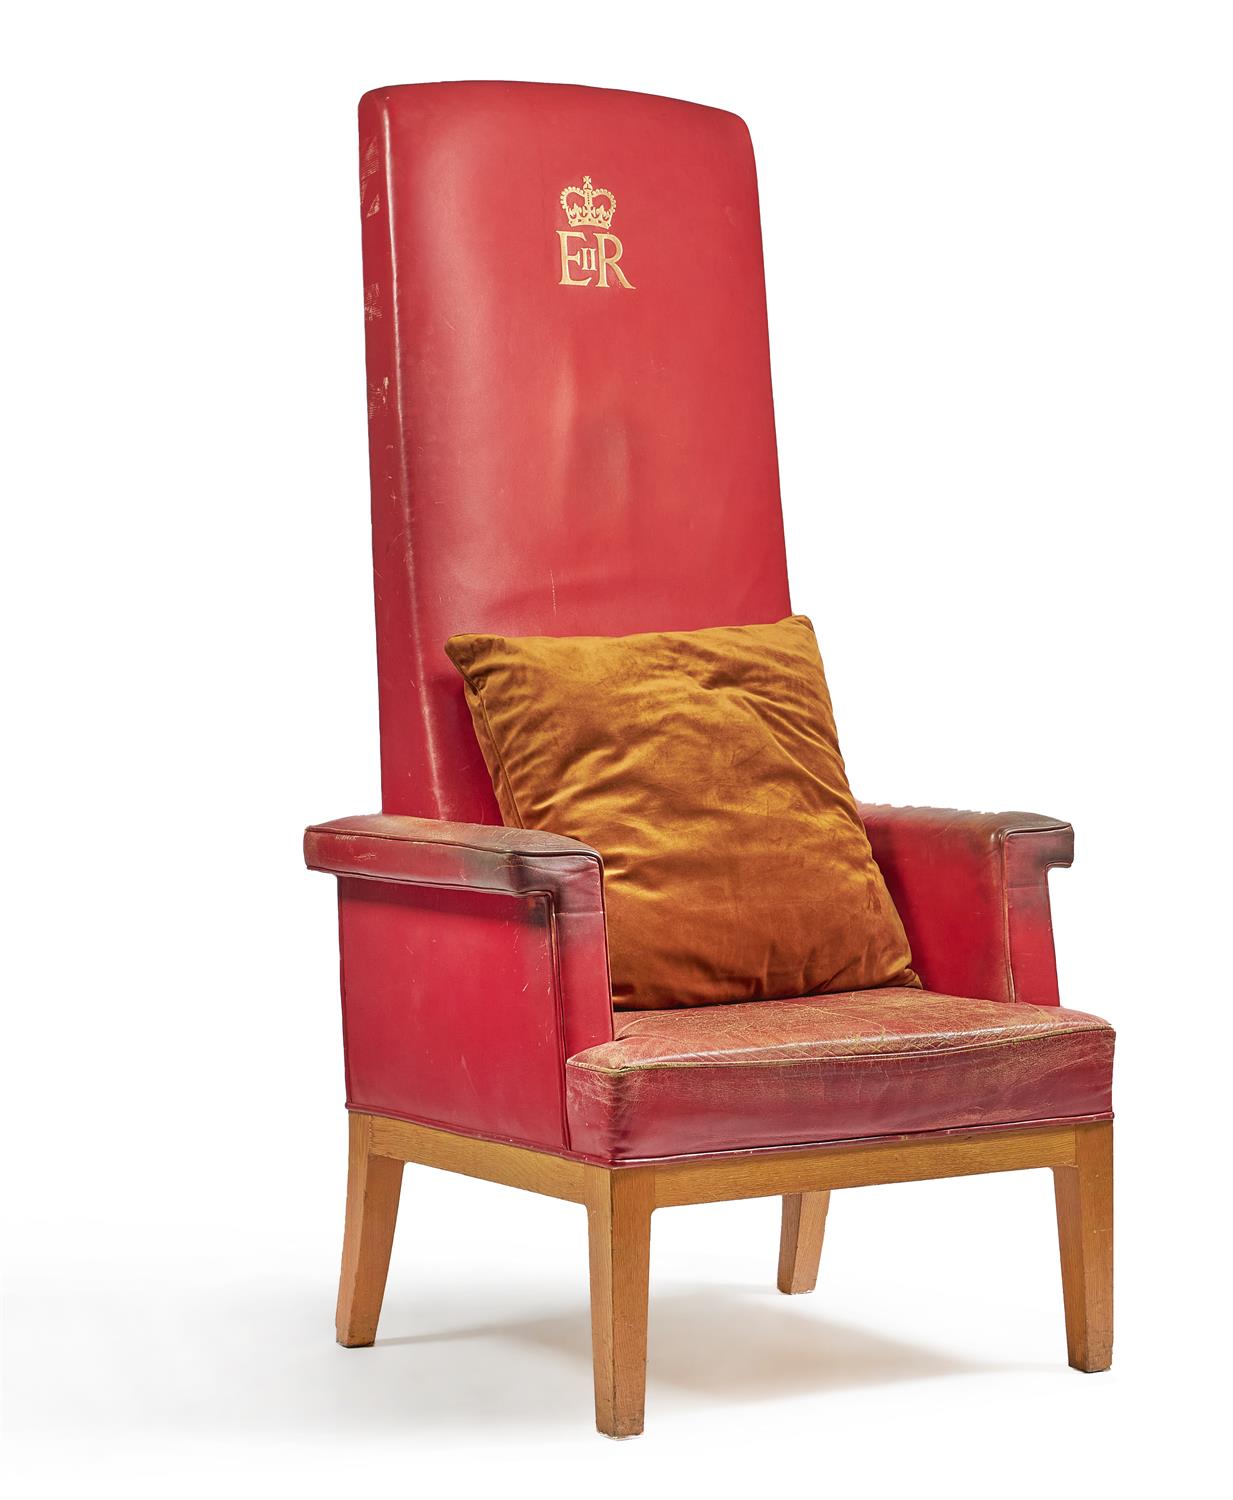 THE LIBRARY RED LEATHER HIGH BACK ARMCHAIR, THIRD QUARTER 20TH CENTURY - Image 3 of 3